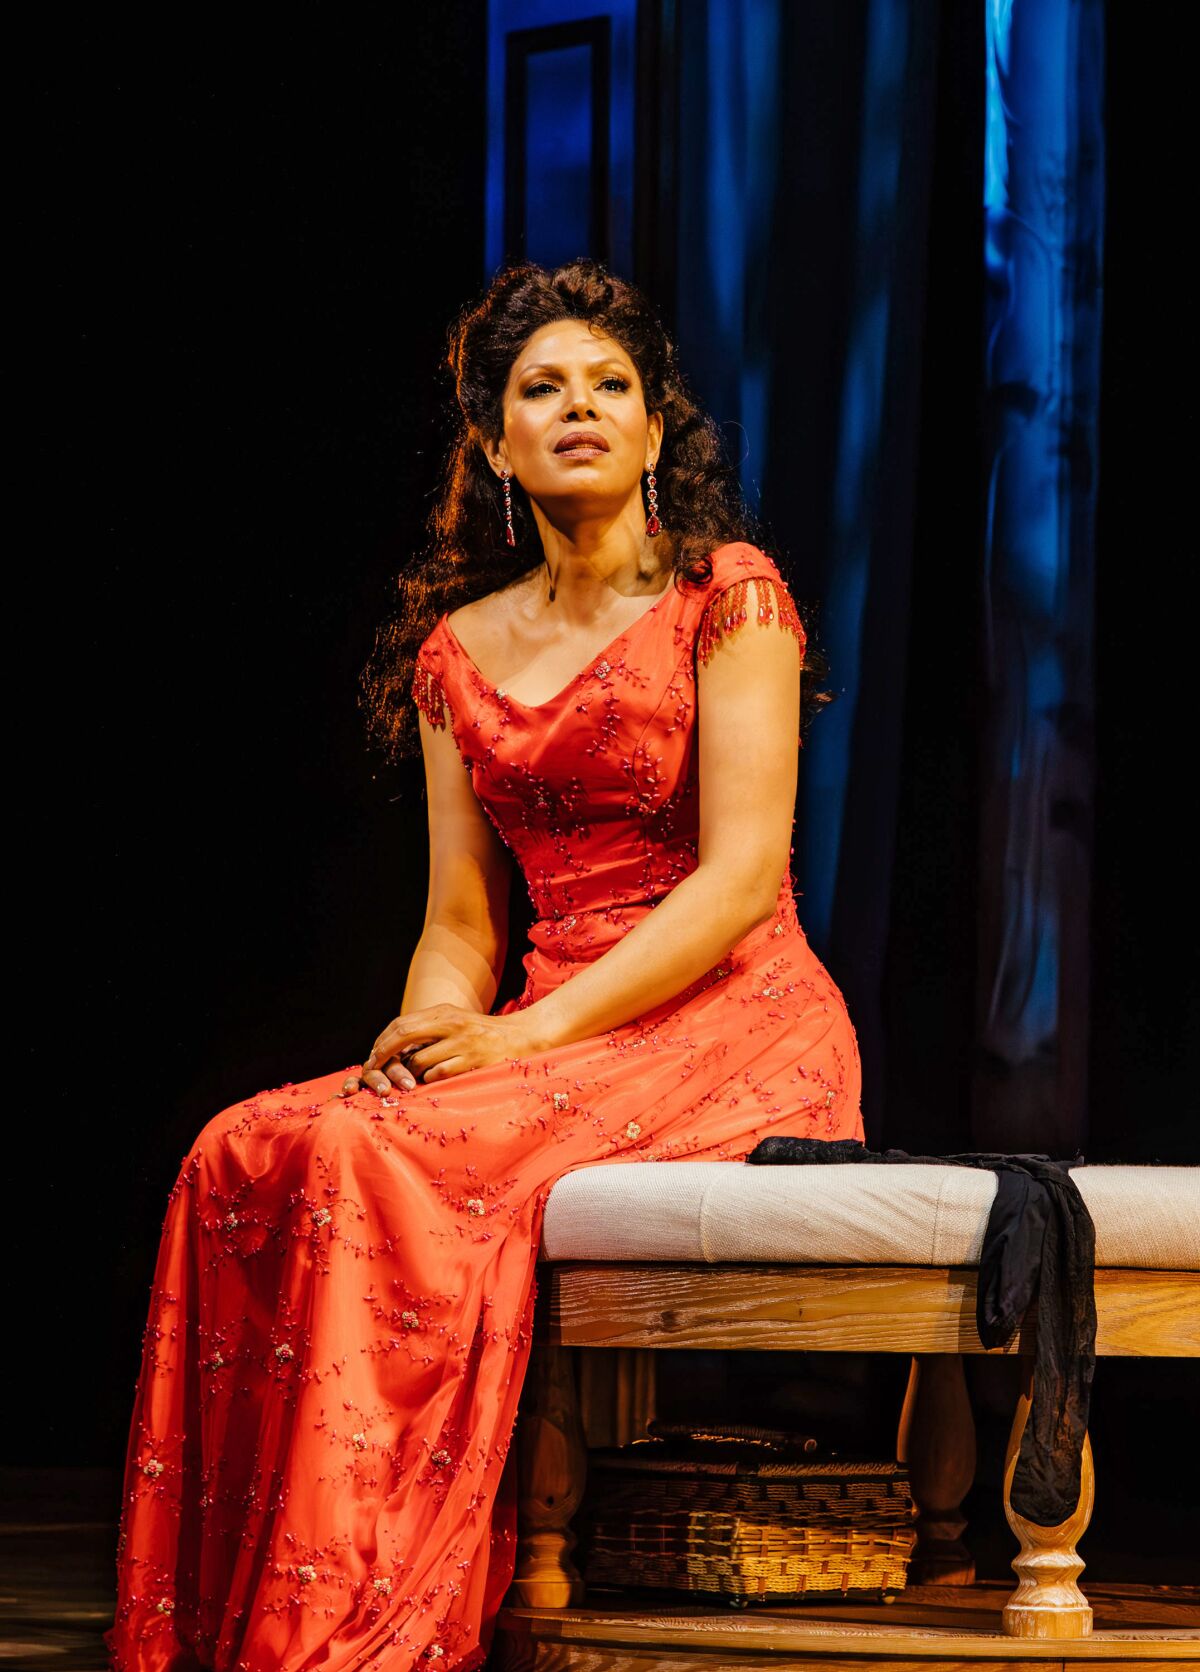 Merle Dandridge wears a red gown while sitting on a bench in "A Little Night Music."